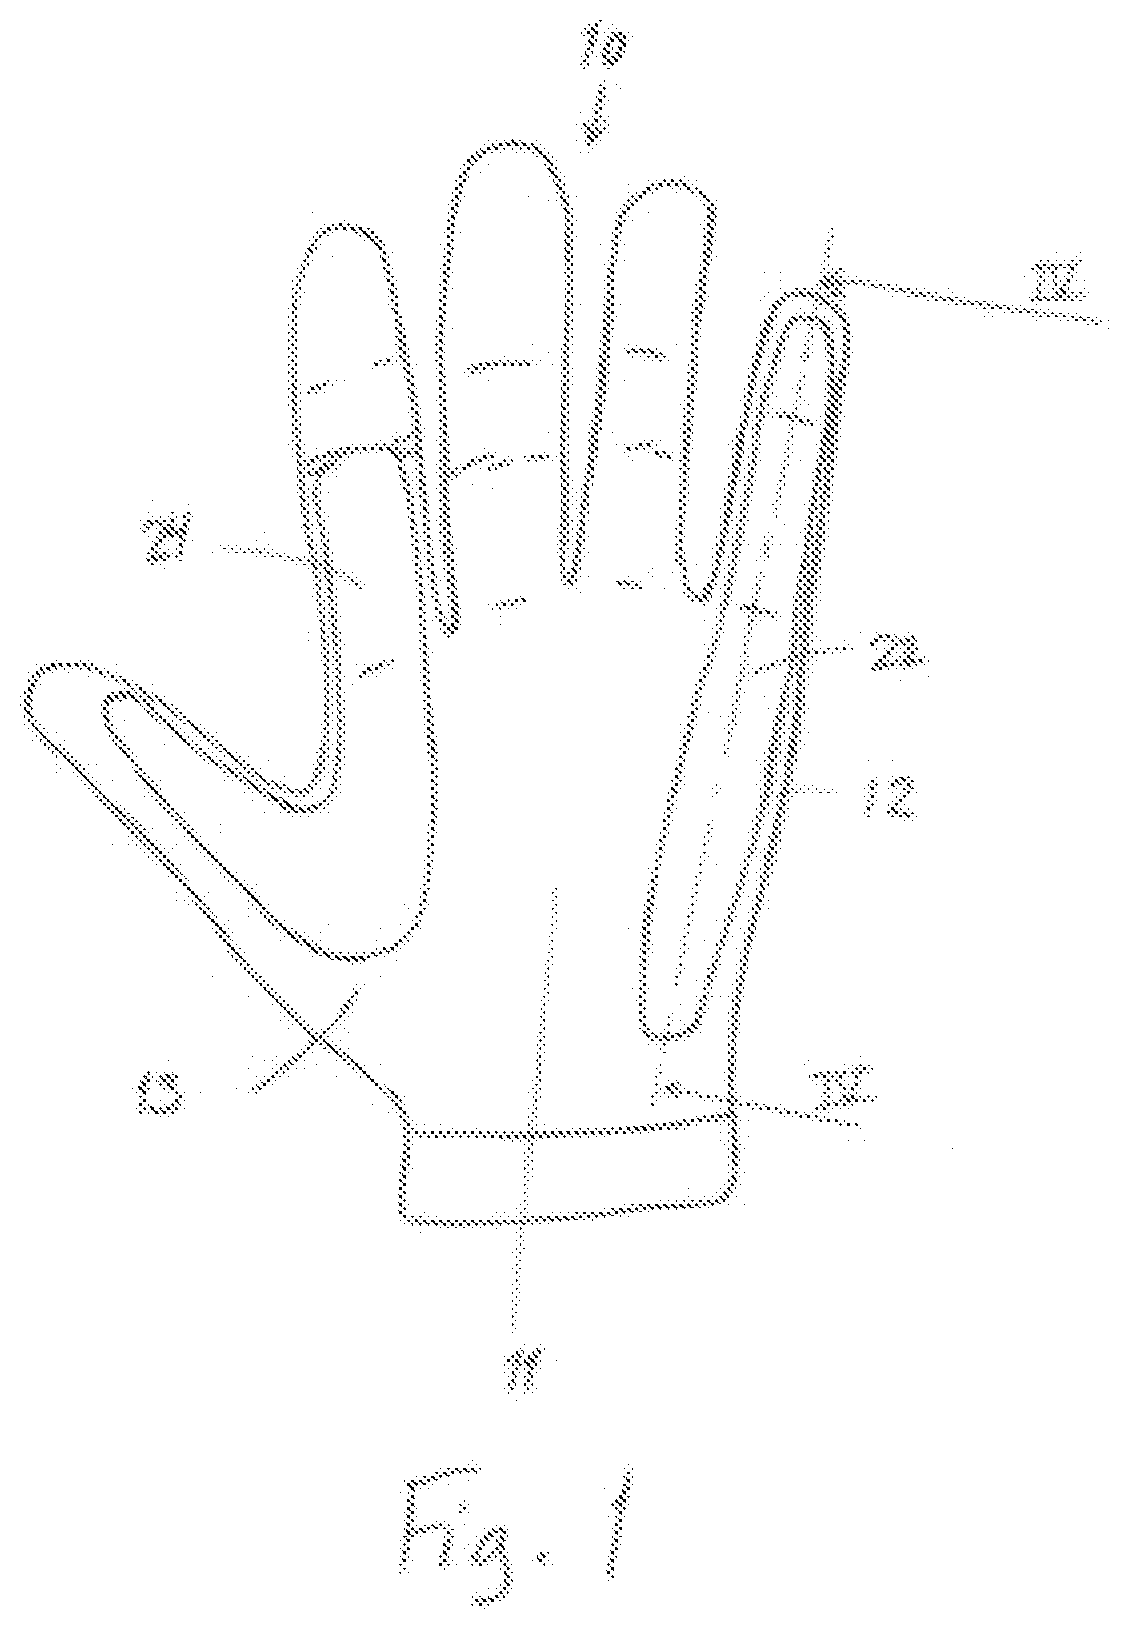 Support for use with a glove